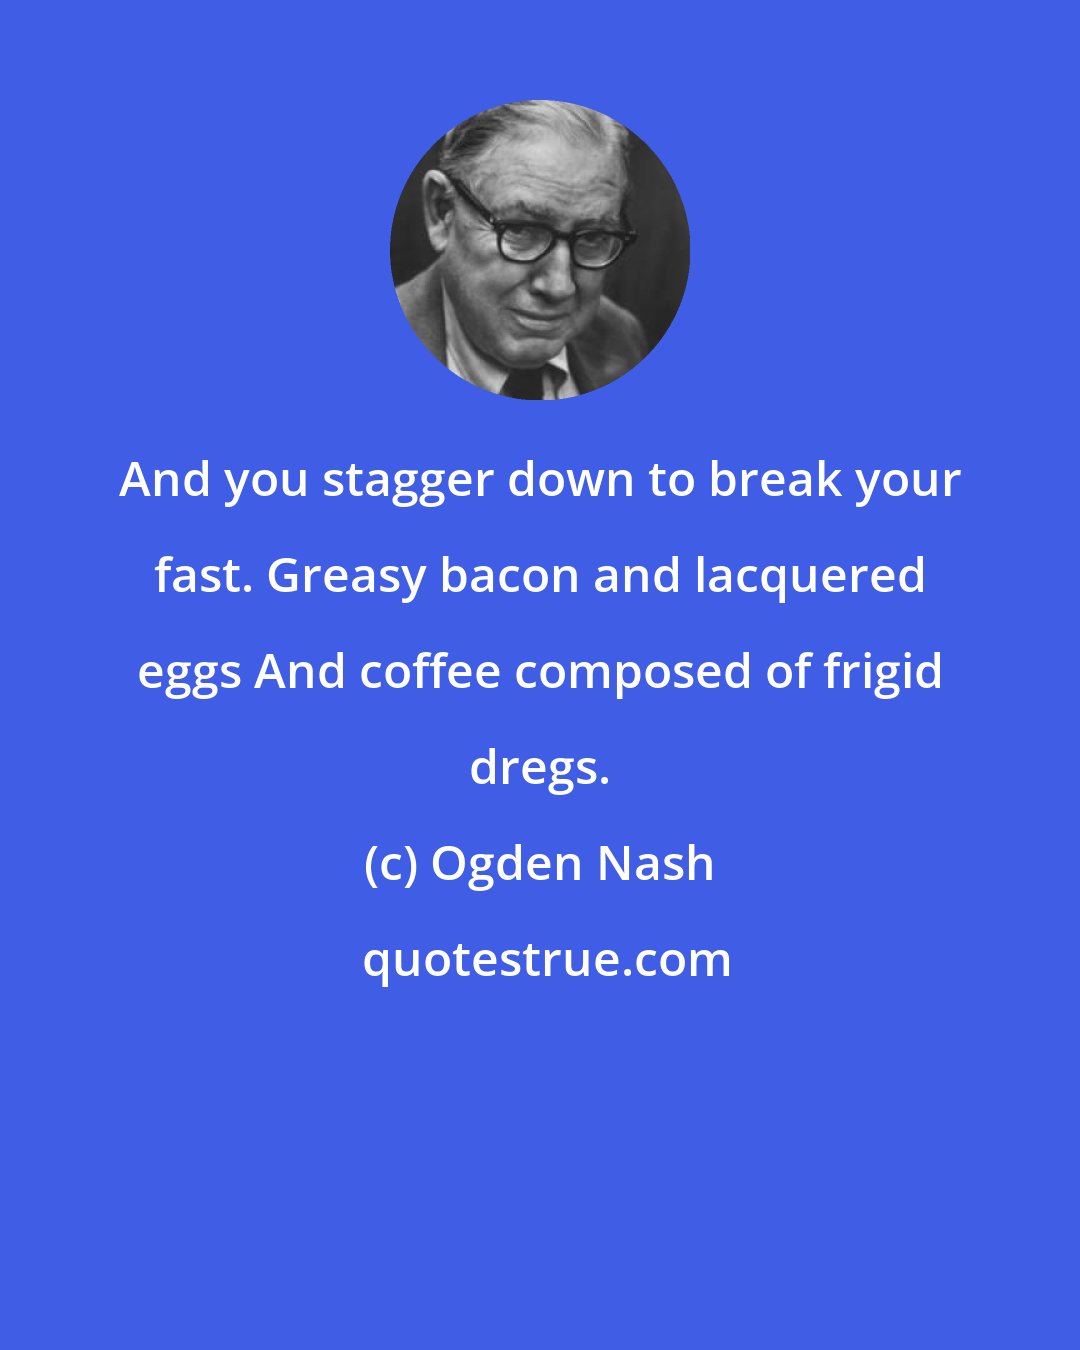 Ogden Nash: And you stagger down to break your fast. Greasy bacon and lacquered eggs And coffee composed of frigid dregs.